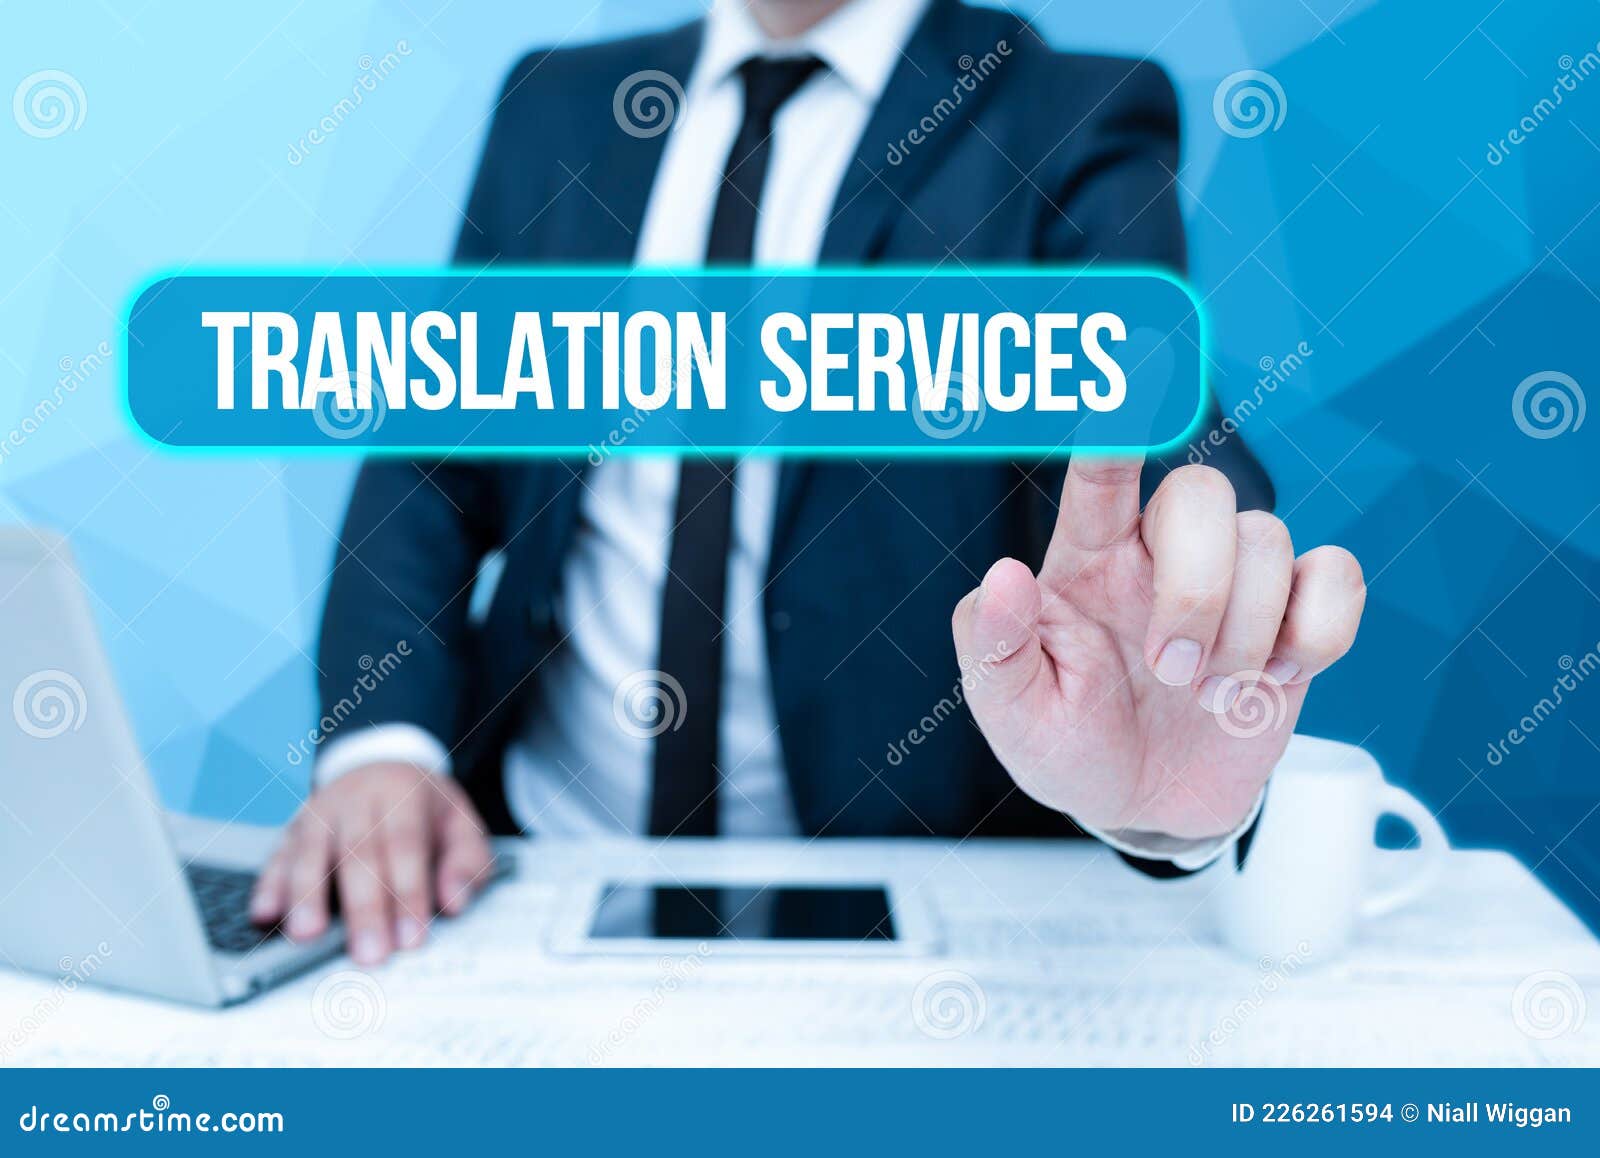 text showing inspiration translation services. word written on organization that provide showing to translate speech